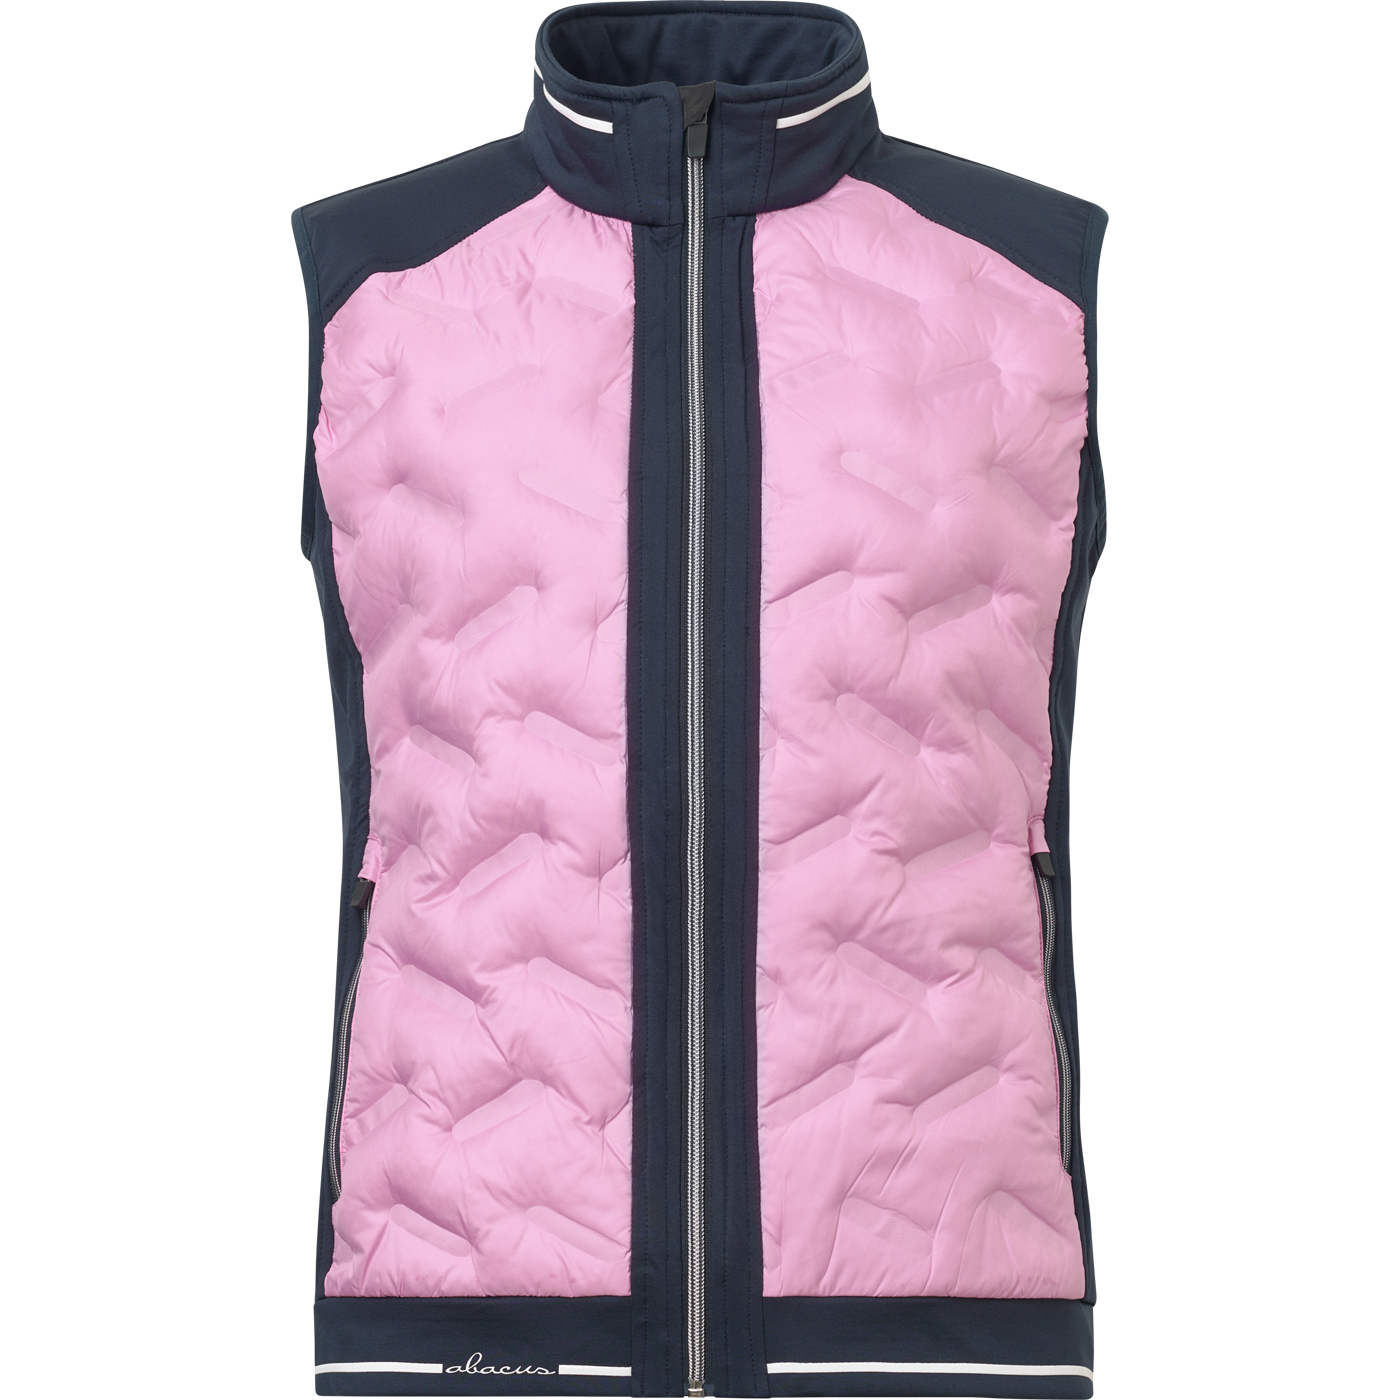 Lds Grove hybrid vest - navy/peony in the group WOMEN / Vests at Abacus Sportswear (2289387)